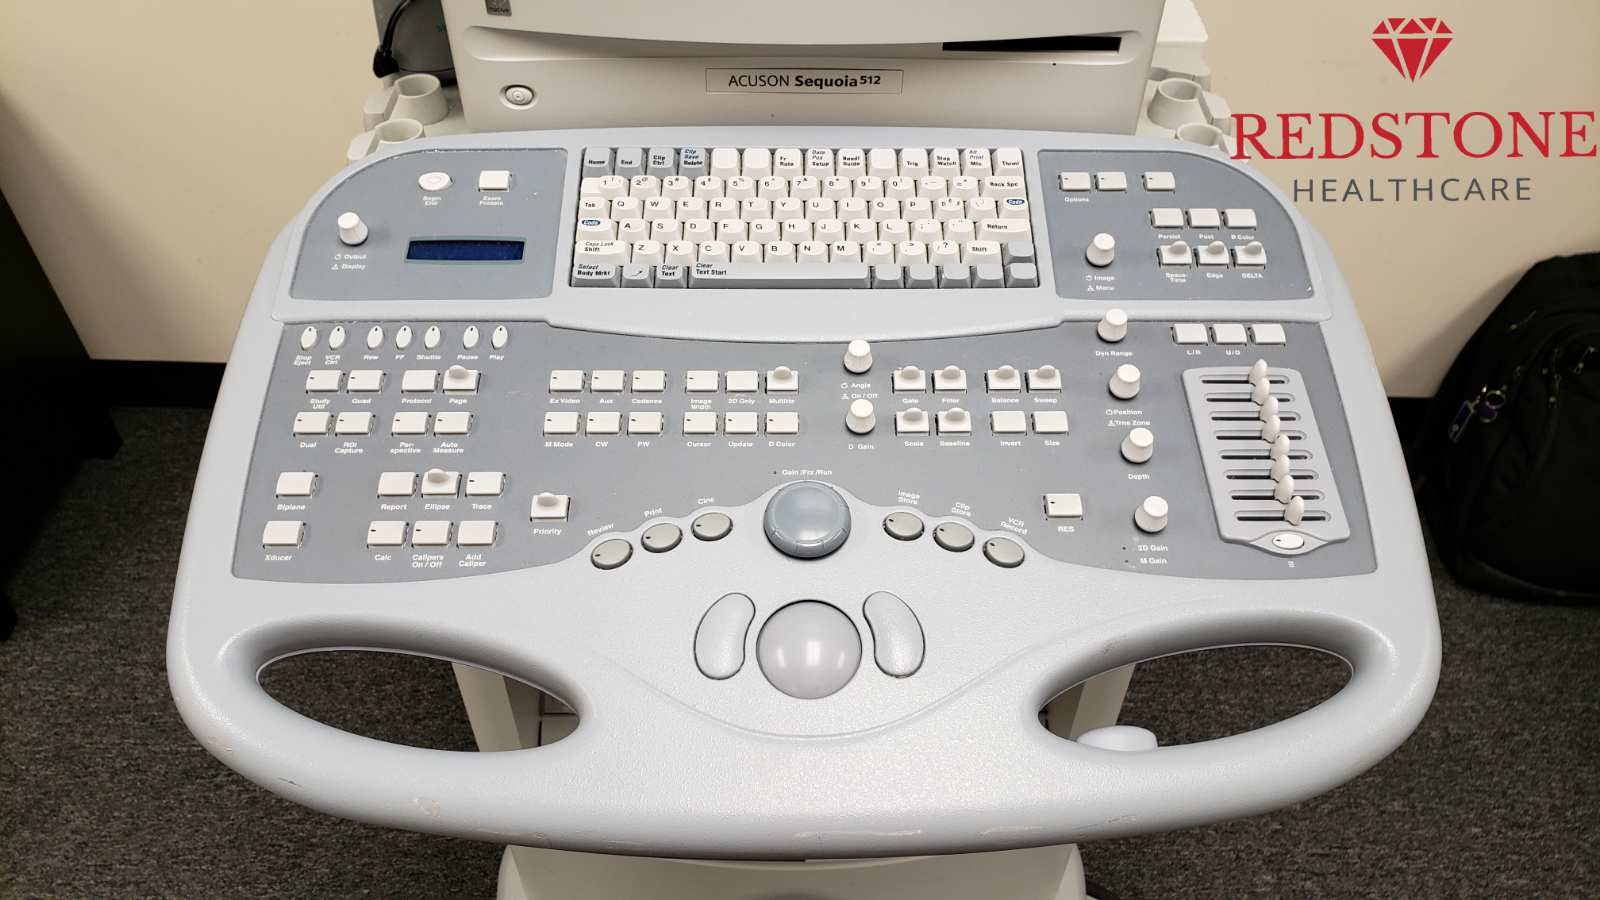 Siemens Acuson Sequoia 512 Ultrasound System Till End of Year $200 Less! DIAGNOSTIC ULTRASOUND MACHINES FOR SALE